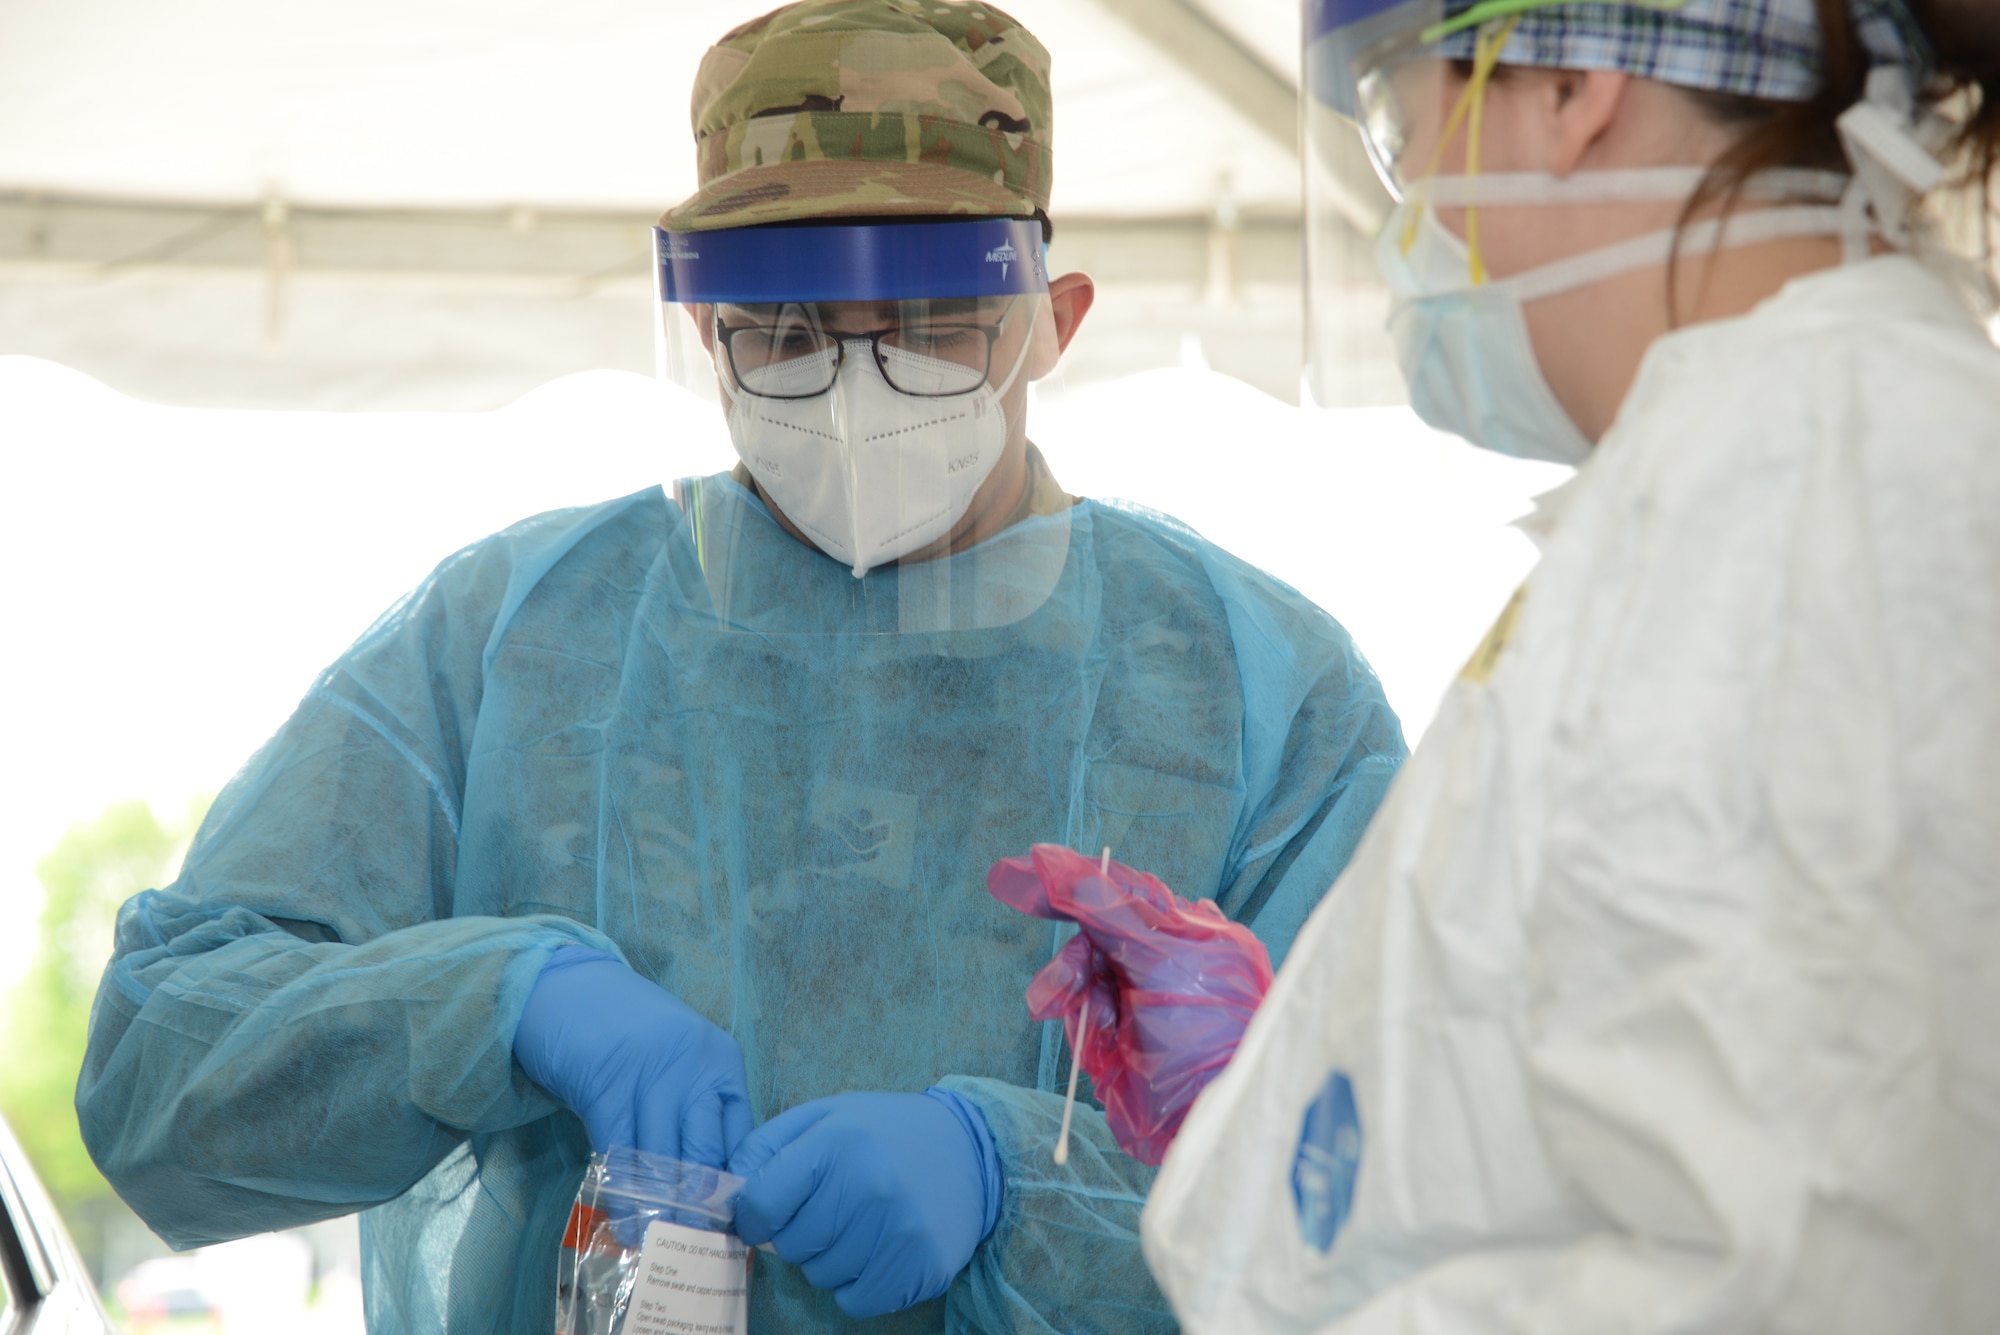 Iowa Air National Guard Senior Airman Manuel Zertuche, a 185th Air Refueling Wing medical technician, works with medical staff to administer a COVID-19 test at the Sioux Center, Iowa, “TestIowa” site May 27, 2020.